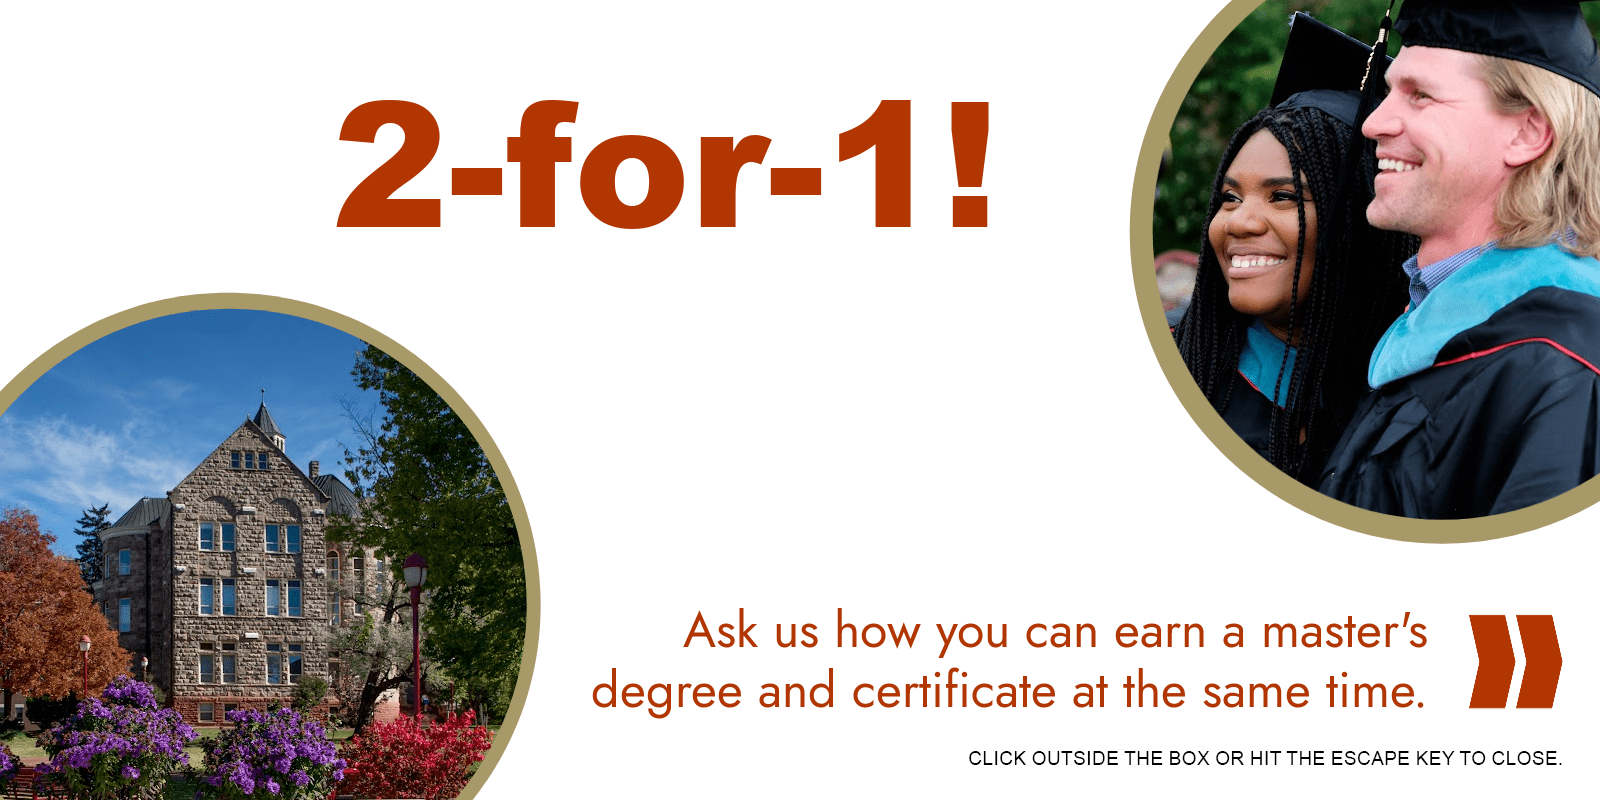 Earn a graduate degree and certificate at the same time.